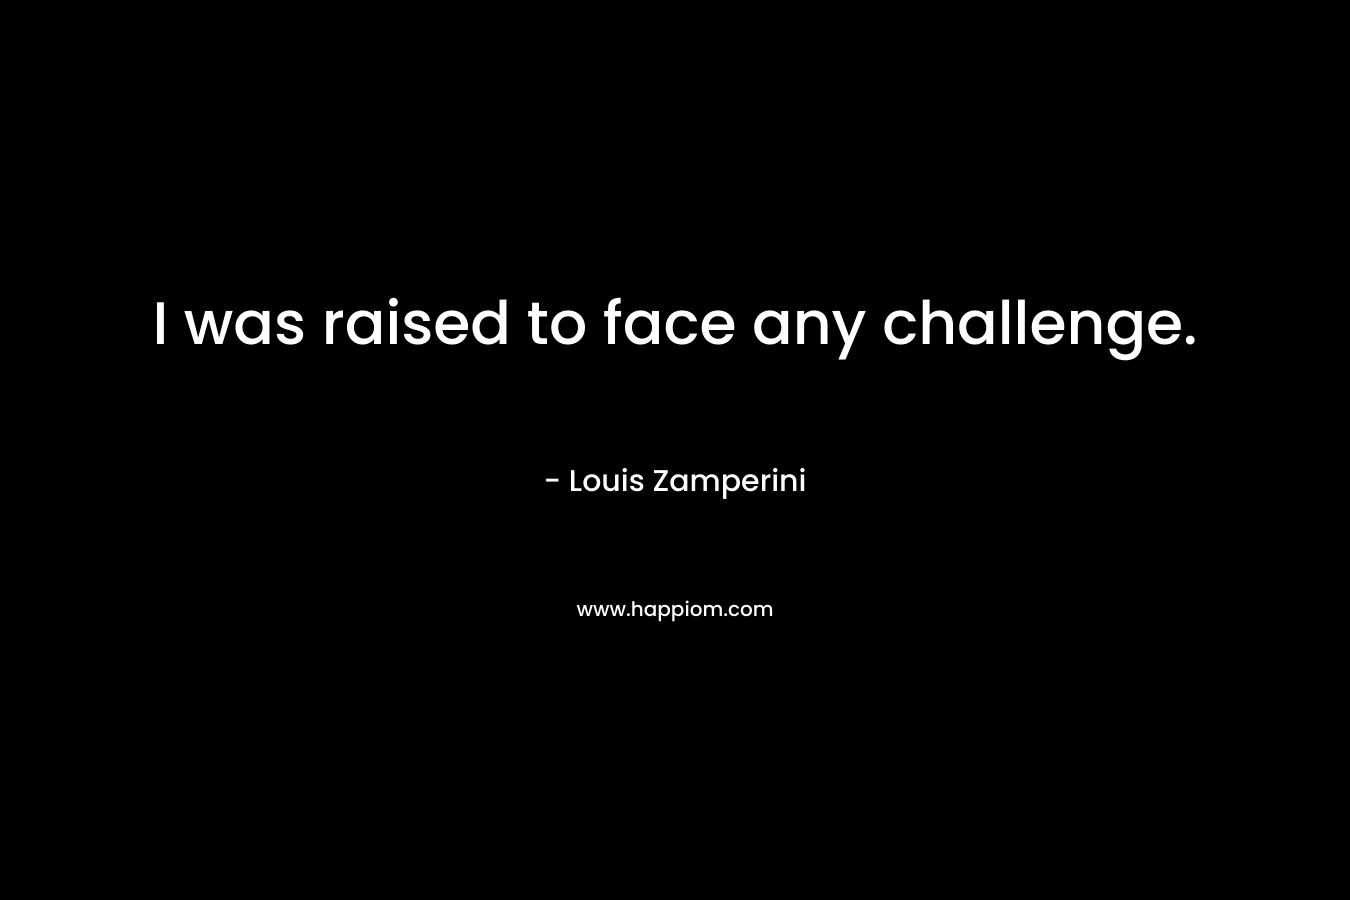 I was raised to face any challenge. – Louis Zamperini